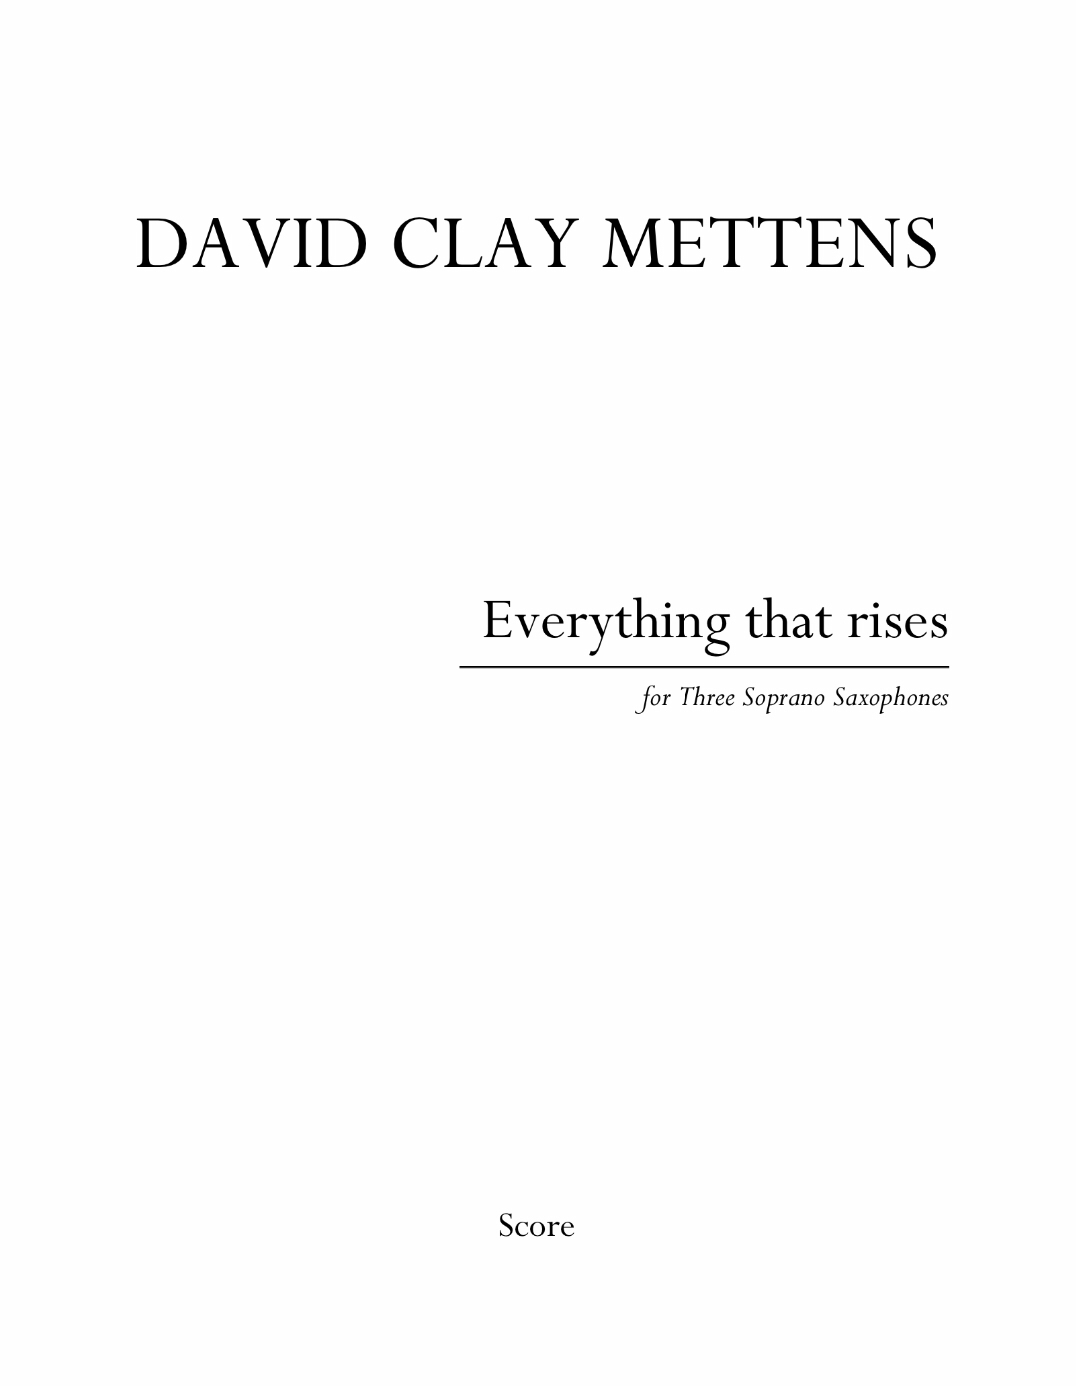 Everything That Rises by David Clay Mettens